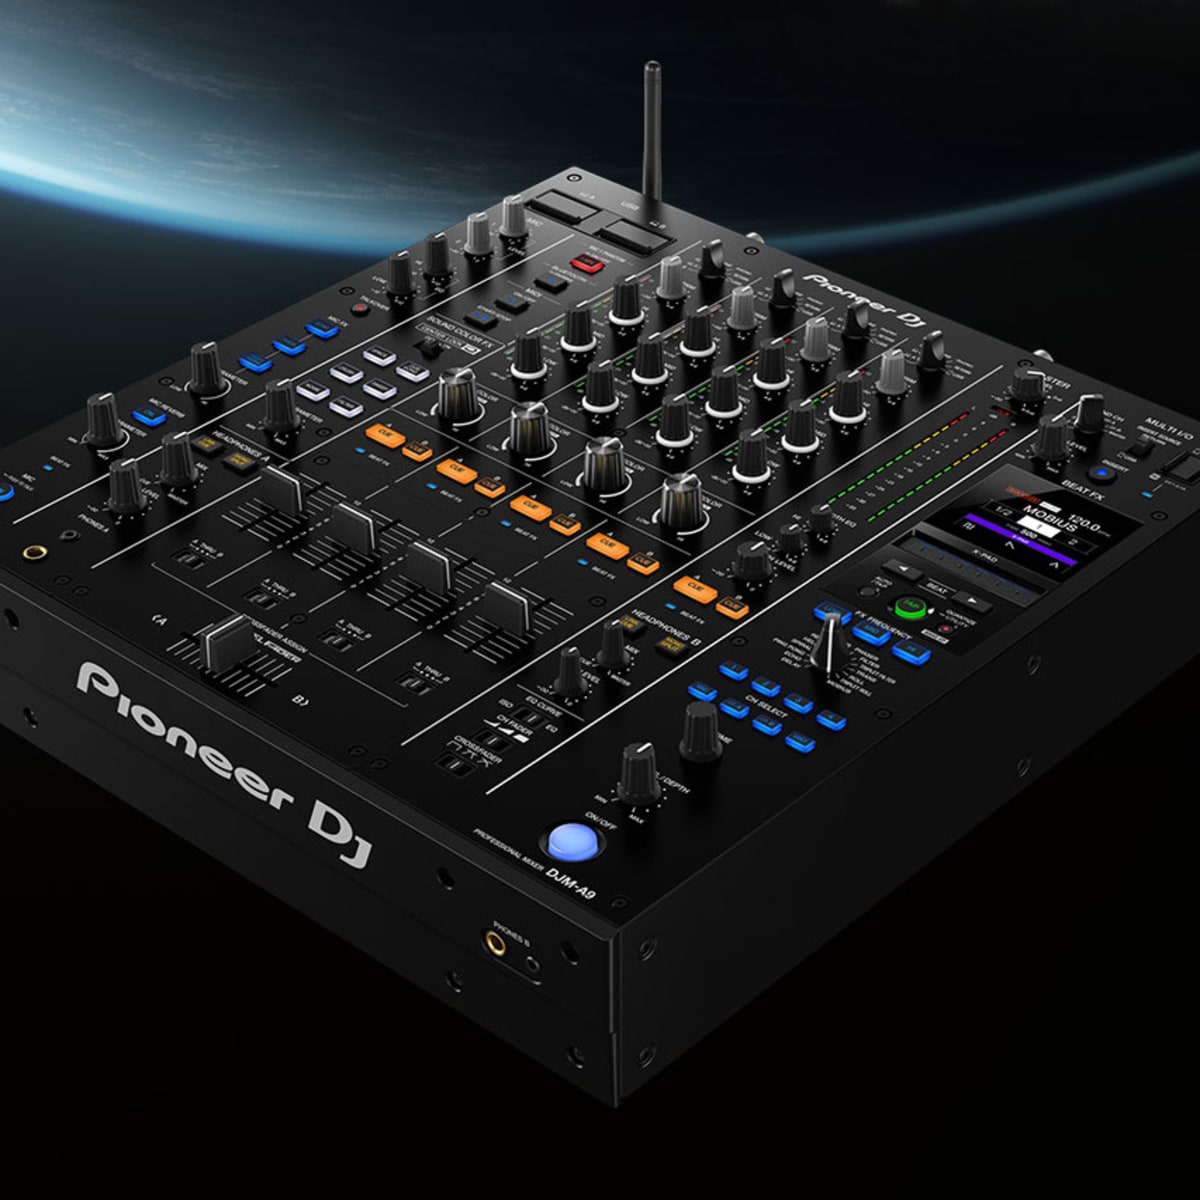 dollar dynasti damp Pioneer DJ Unveils Next Generation Mixer, DJM-A9, With Expanded Toolkit -  EDM.com - The Latest Electronic Dance Music News, Reviews & Artists